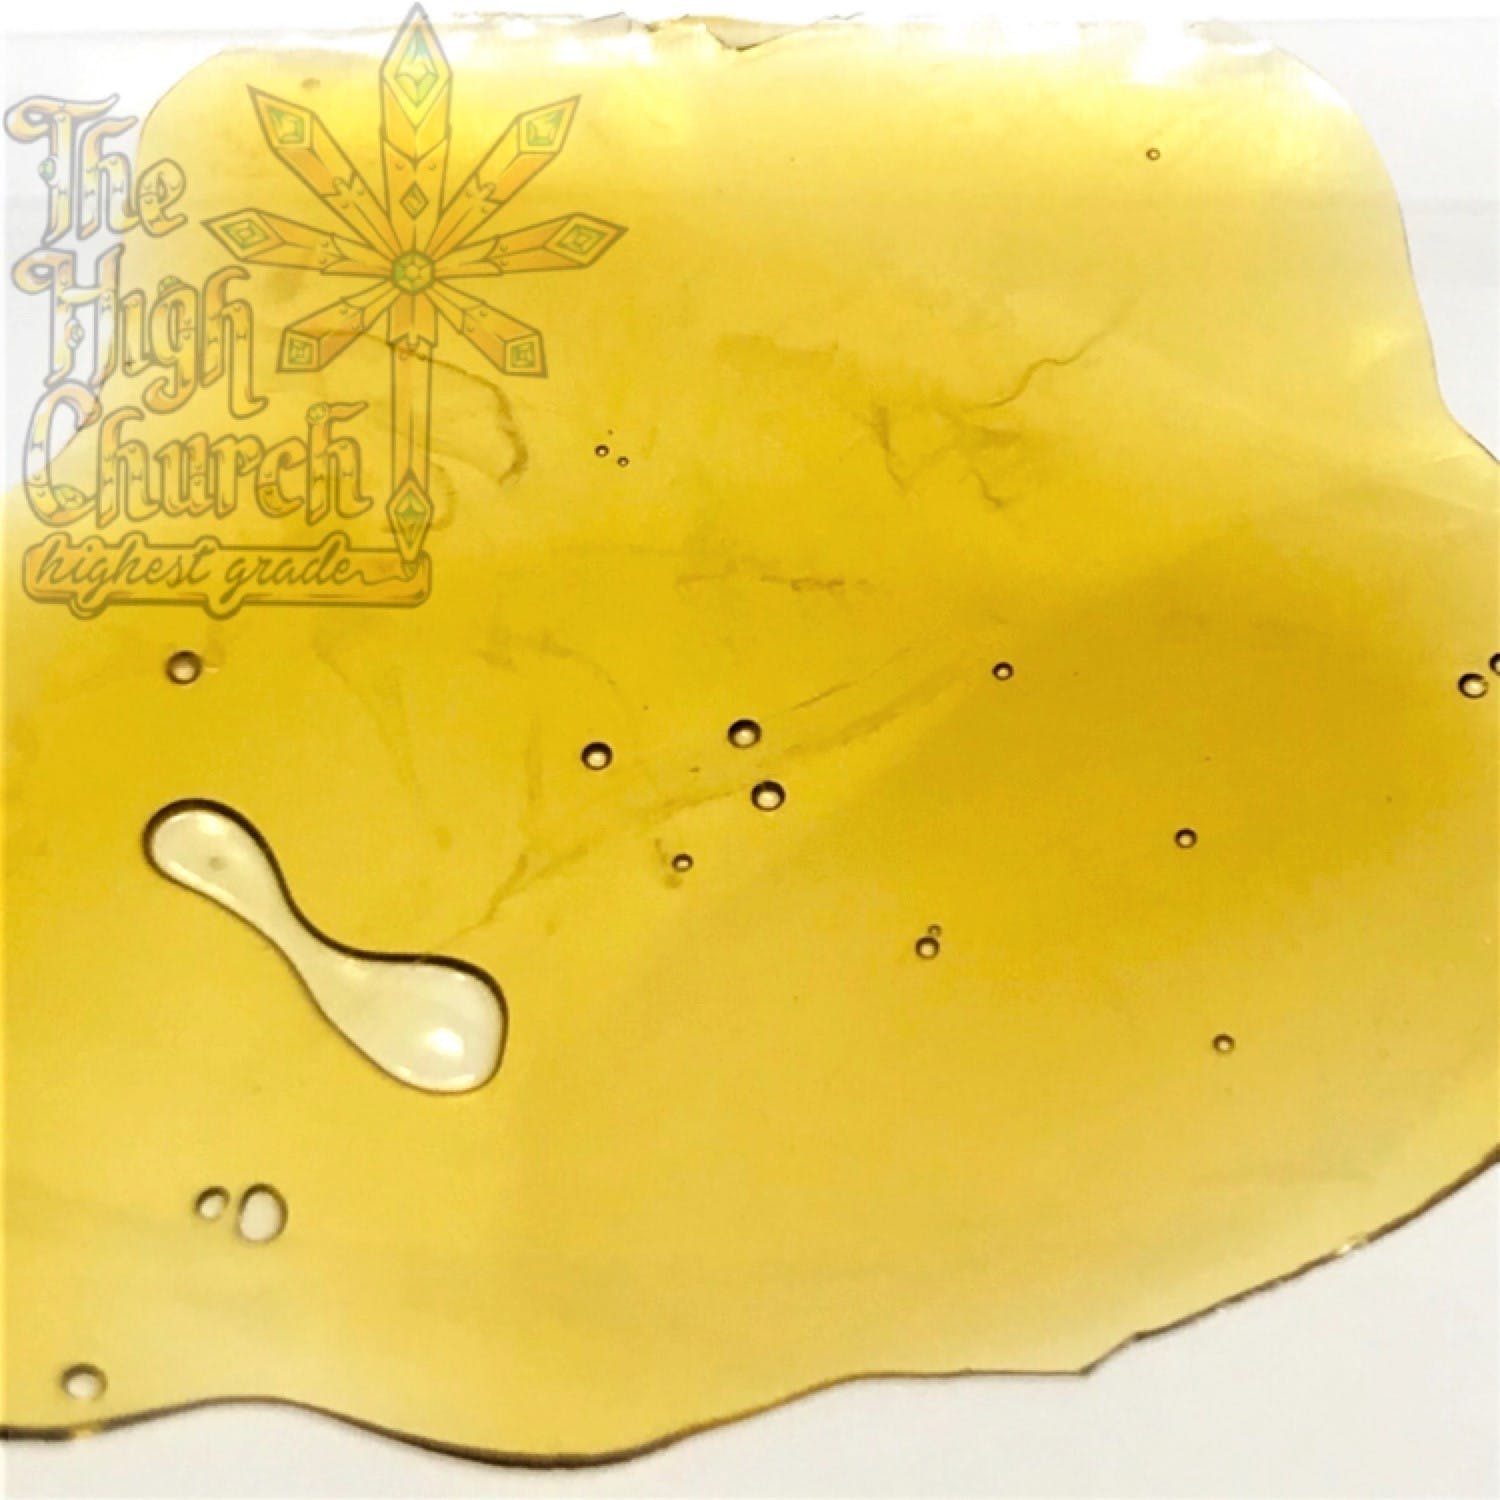 concentrate-shaman-extracts-peanut-butter-breath-nug-run-shatter